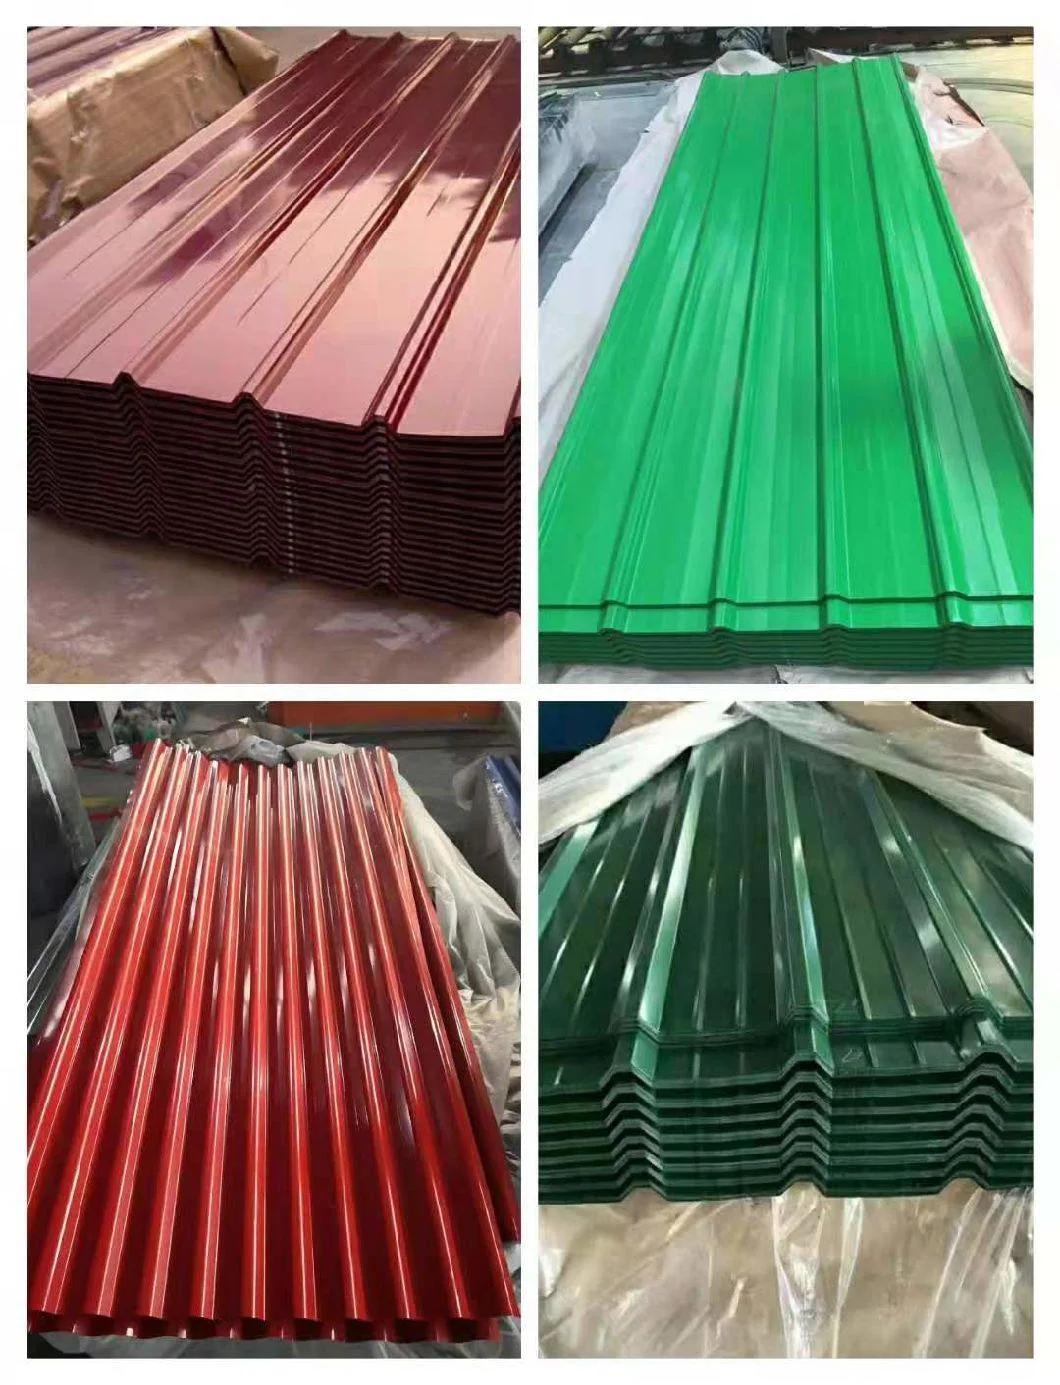 New Type Top Sale Galvanized Prepainted Steel for Corrugated Roofing Sheet